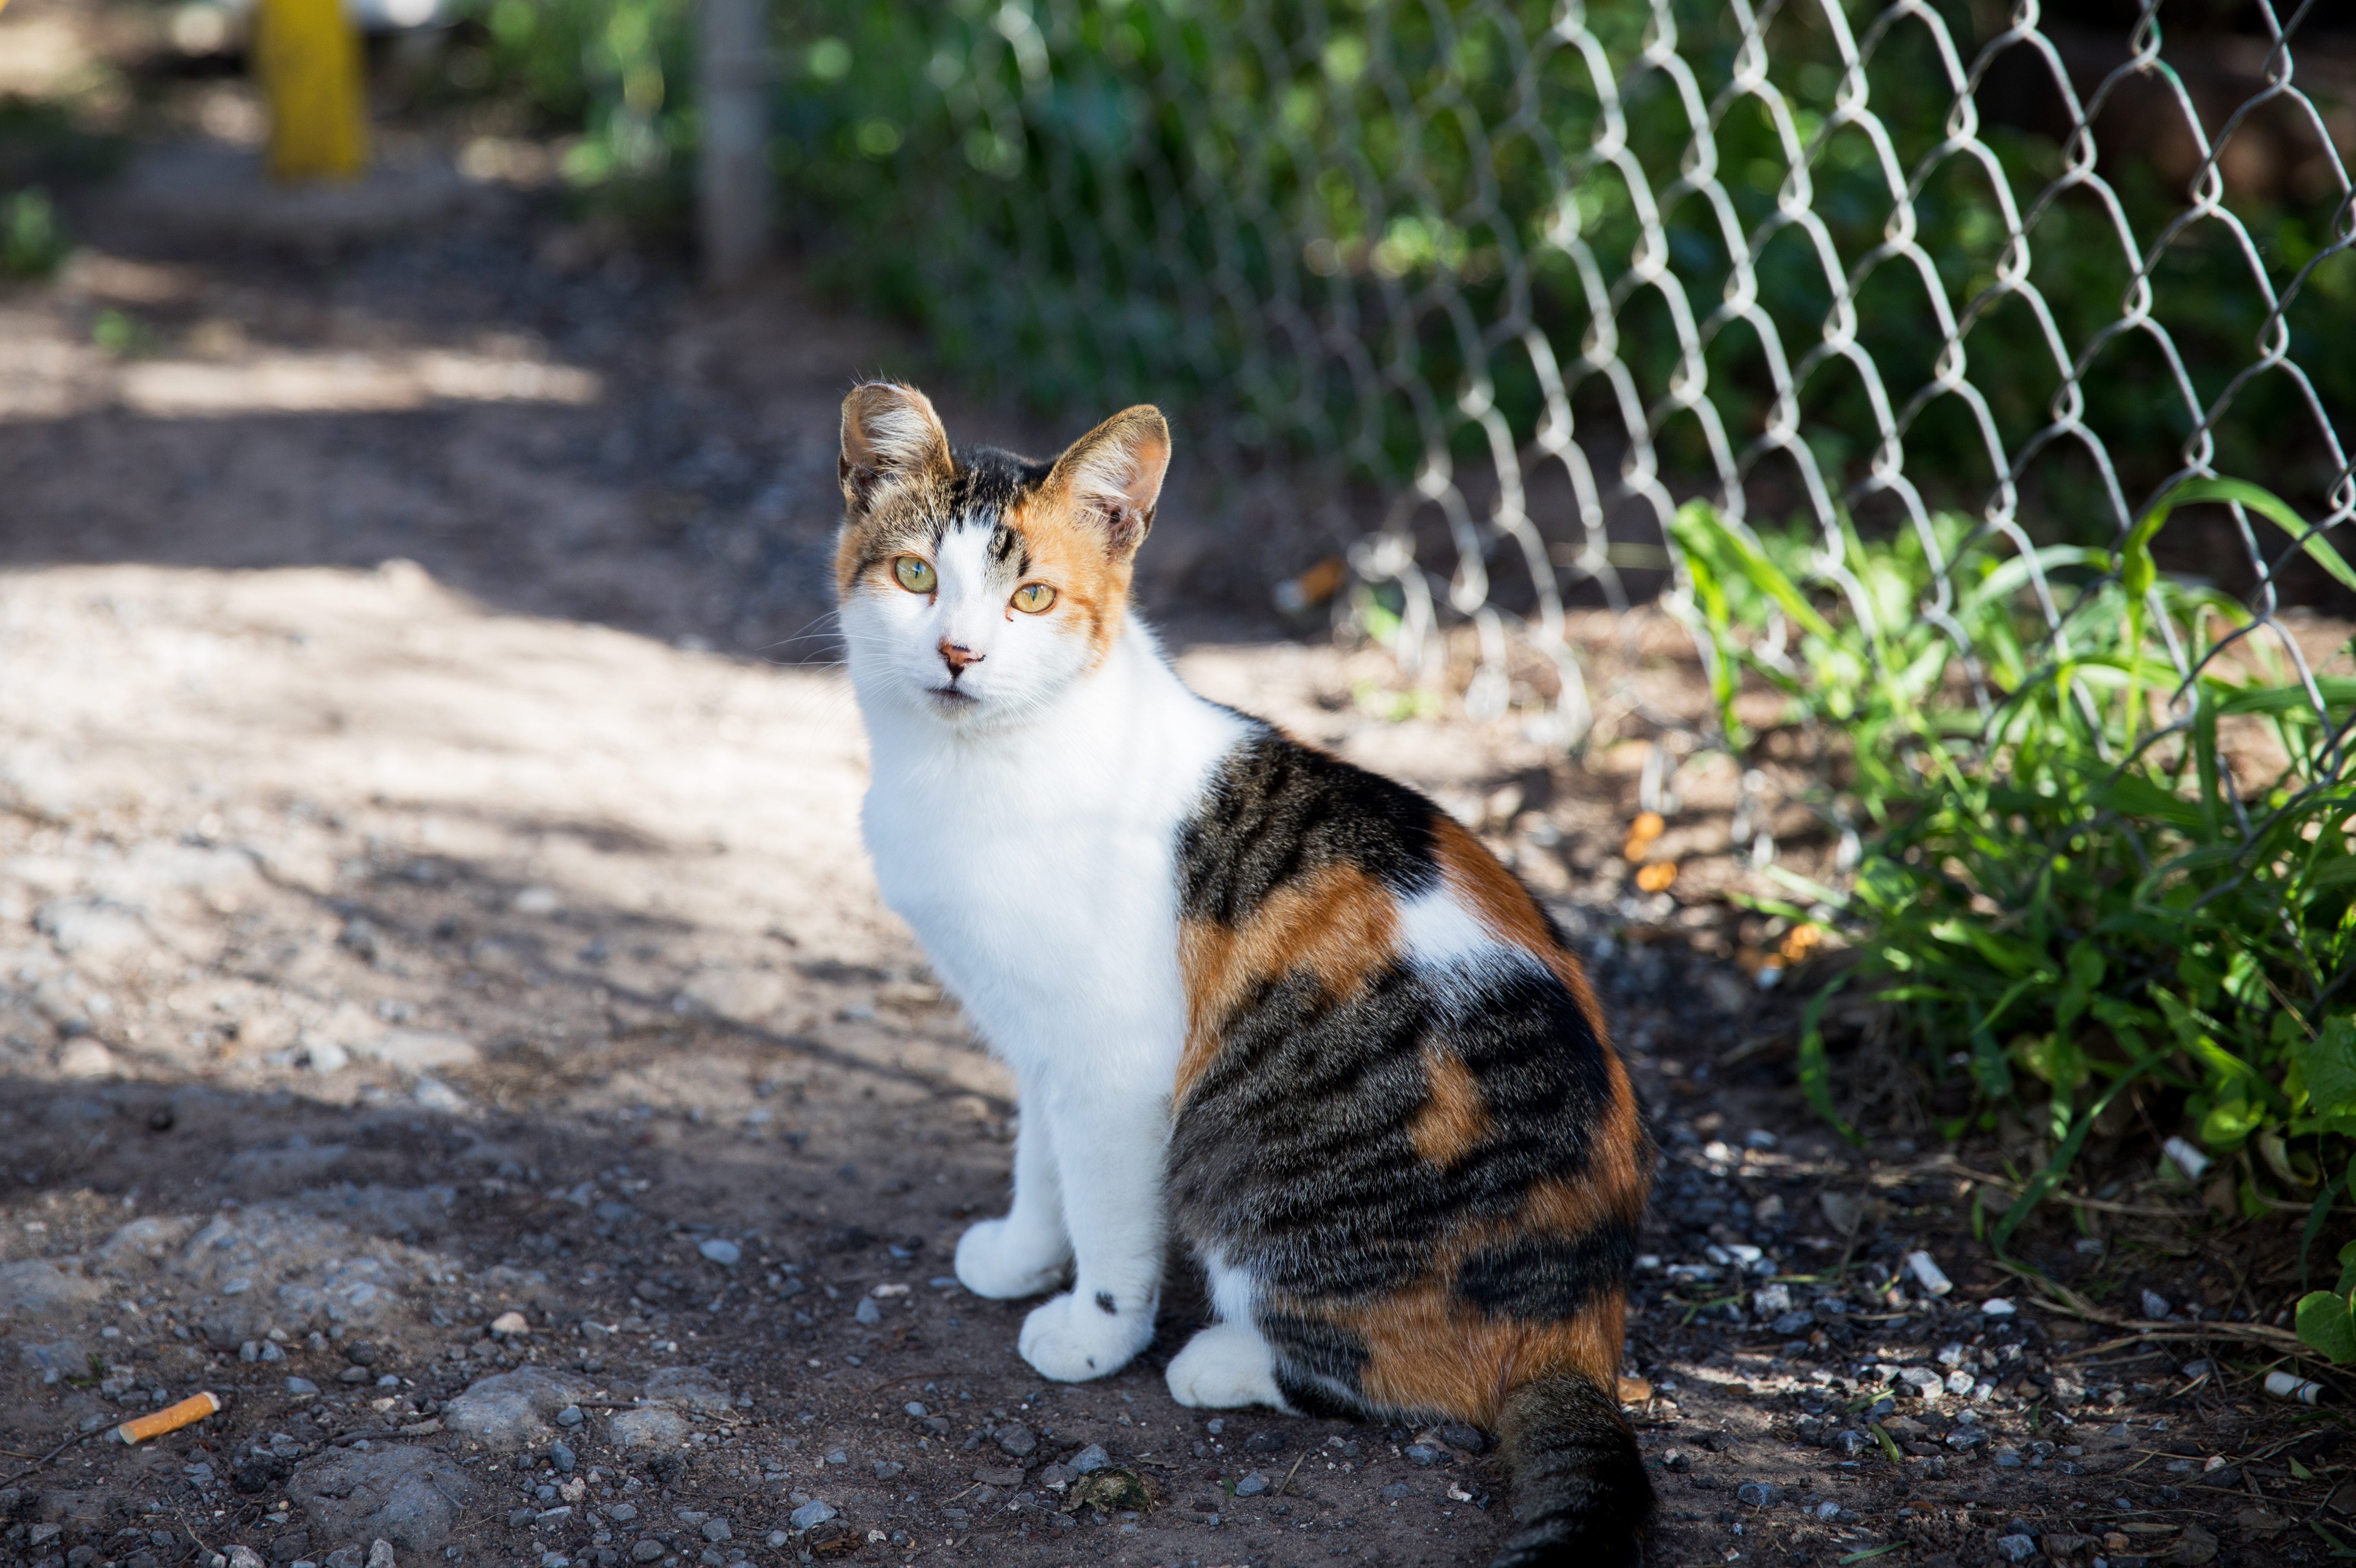 Calico community cat with a tipped ear